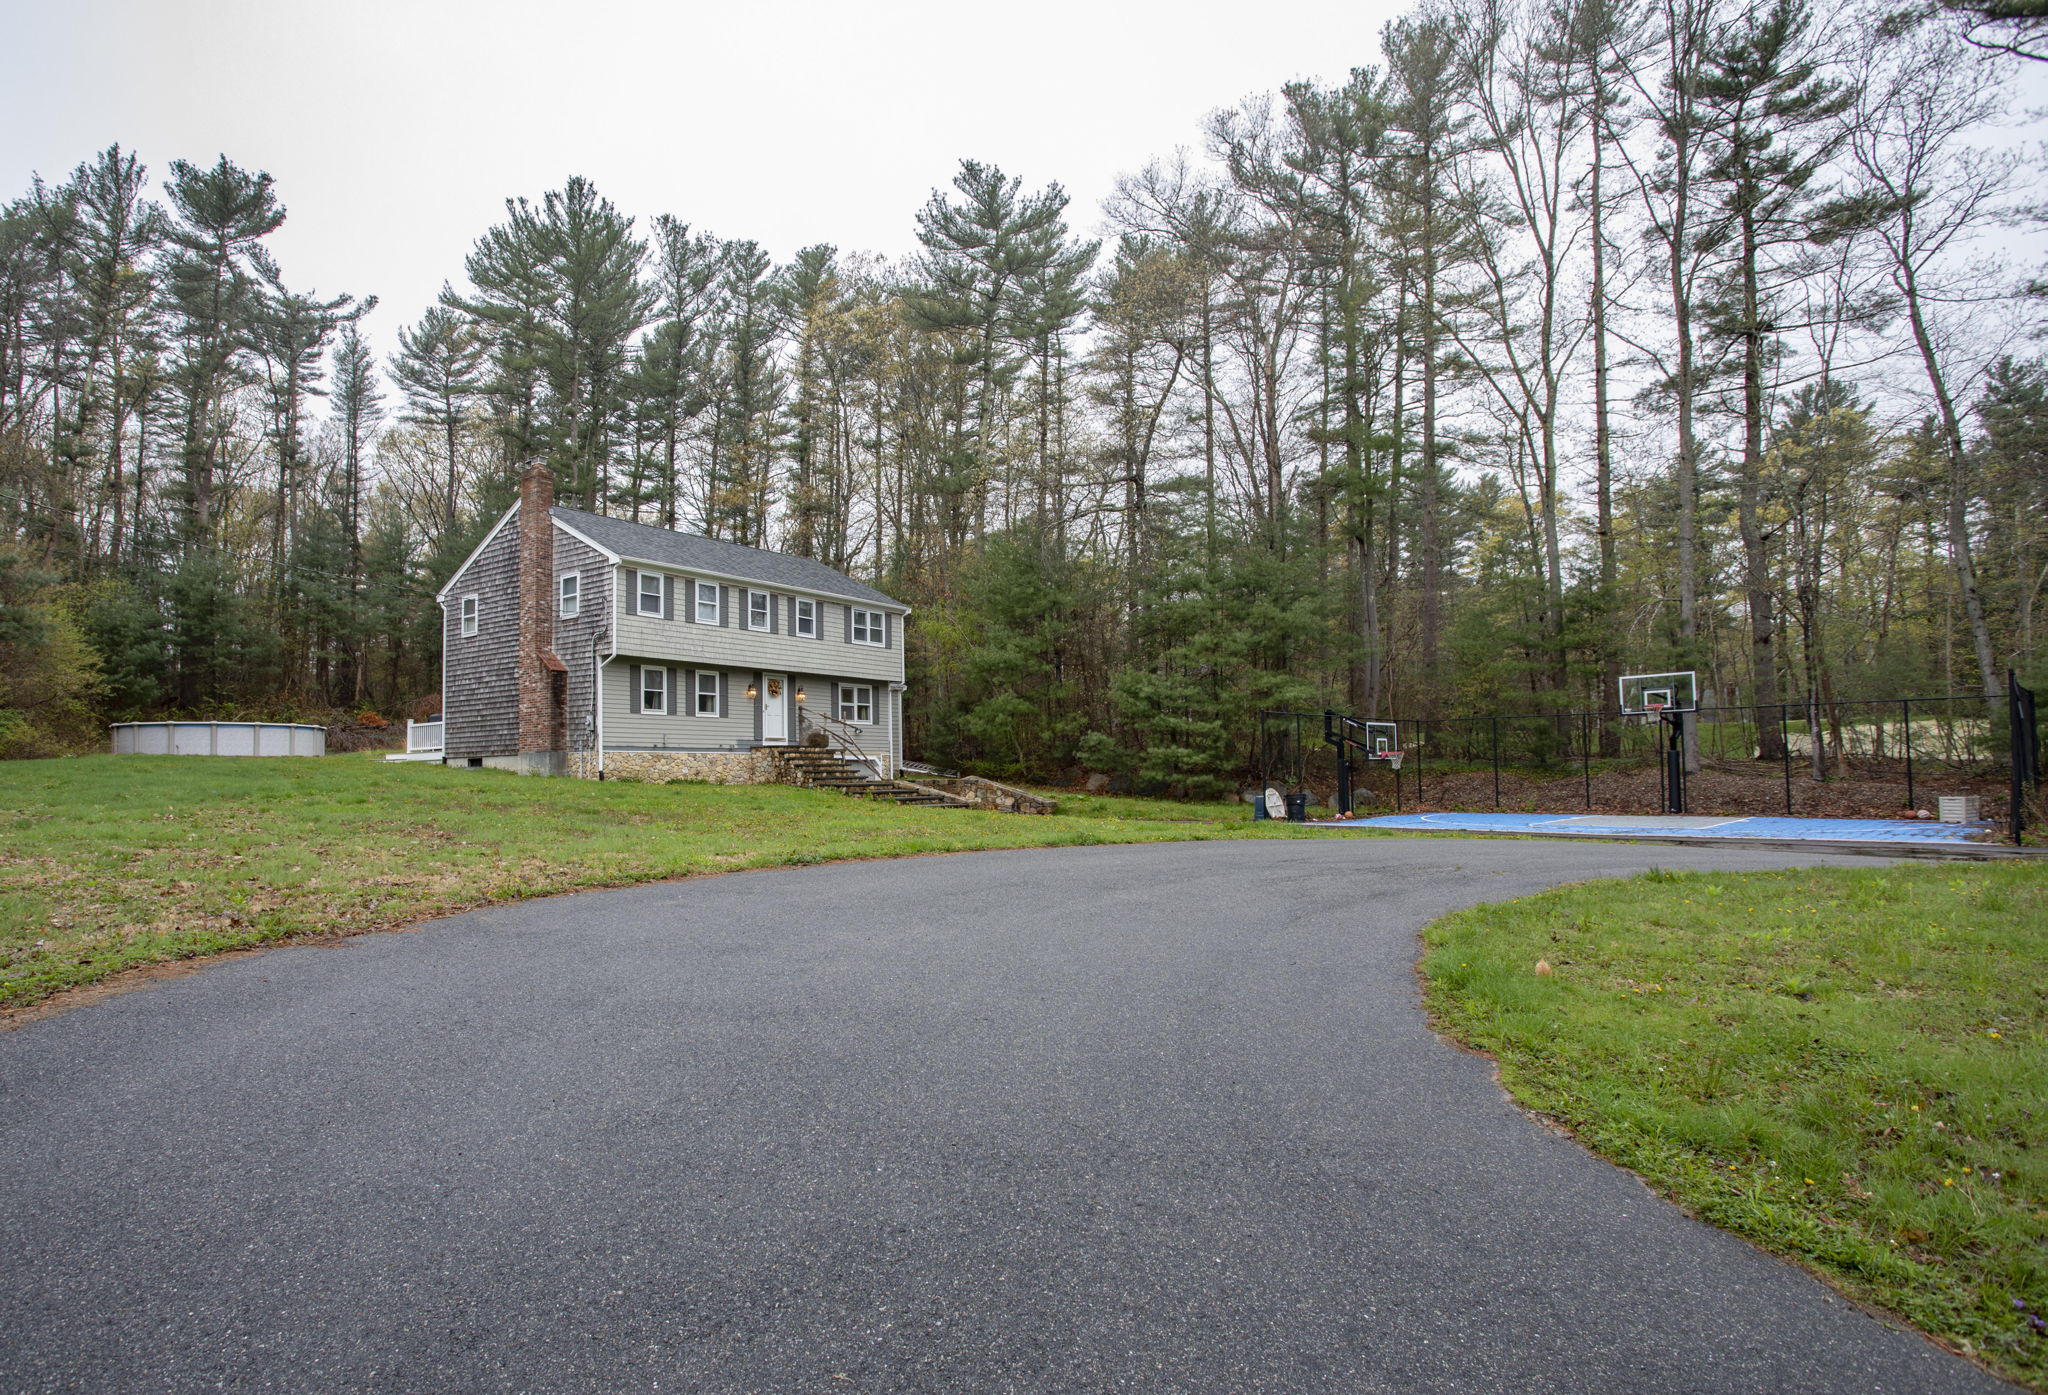  31 Old Powder House Rd, Lakeville, MA 02347, US